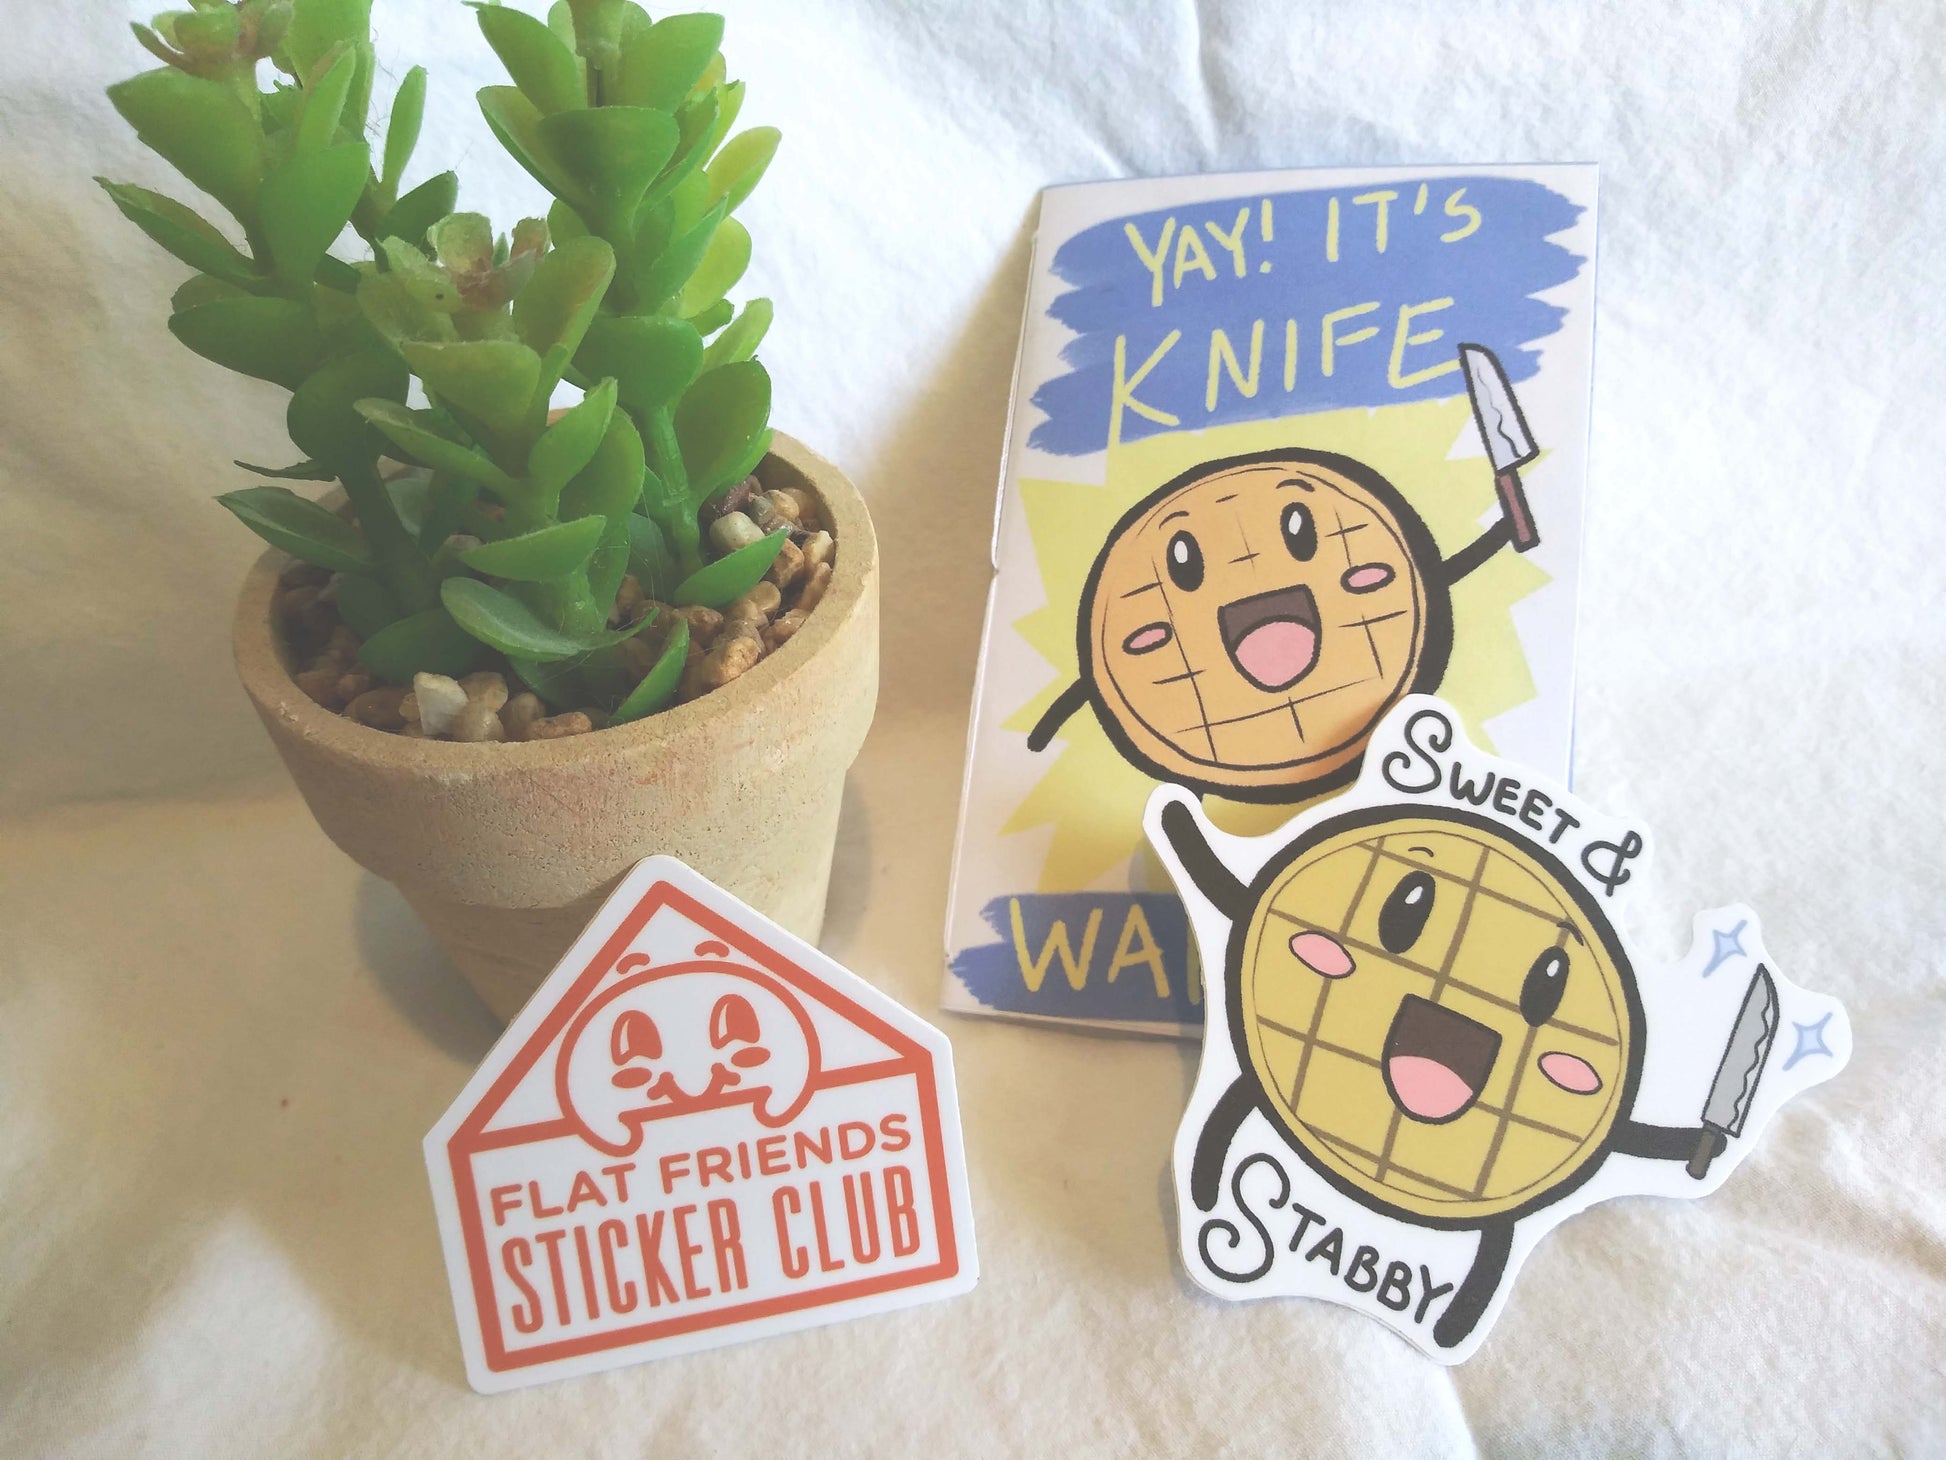 Two stickers and a mini booklet are next to a small potted succulent. The booklet says, "Yay! It's Knife Waffle!" and has a waffle with a cutesy face holding a knife. The sticker on the left is a logo of an enevelope with a cute, round face peeking out and the words, "Flat Friends Sticker Club" on it. The sticker on the left is the waffle with the knife and has the text "Sweet & Stabby" around the image